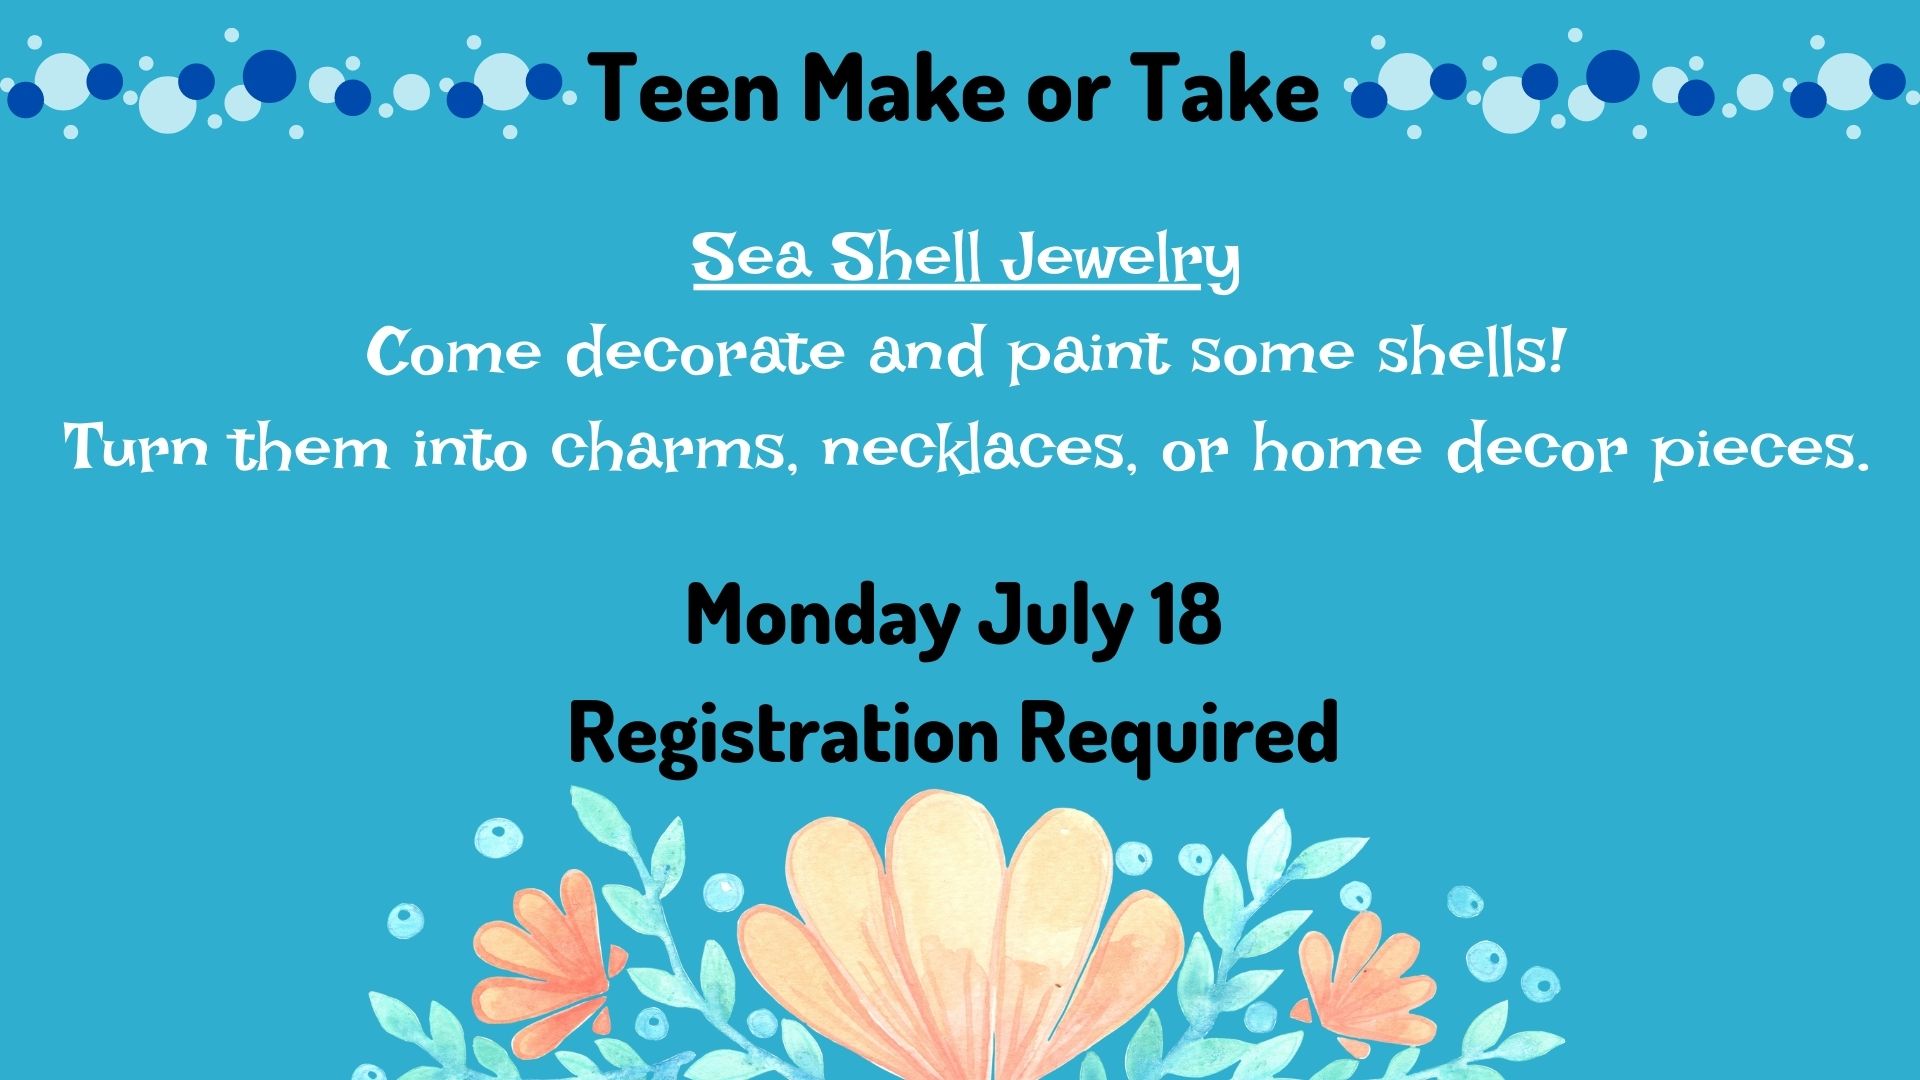 Flyer for Teen Make or Take Sea Shell Jewelry